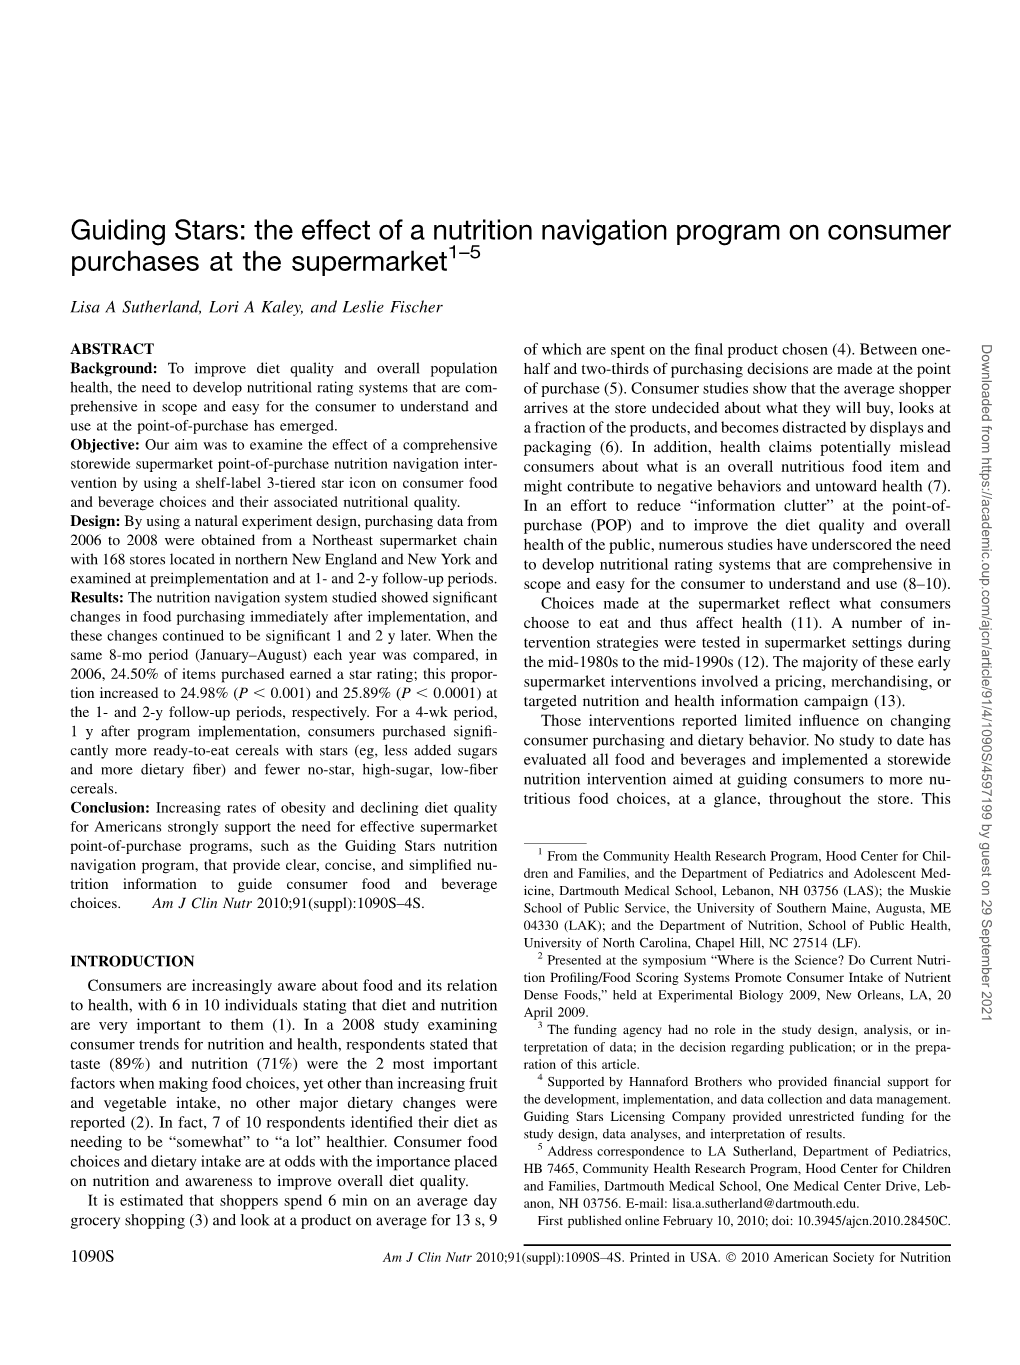 Guiding Stars: the Effect of a Nutrition Navigation Program on Consumer Purchases at the Supermarket1–5